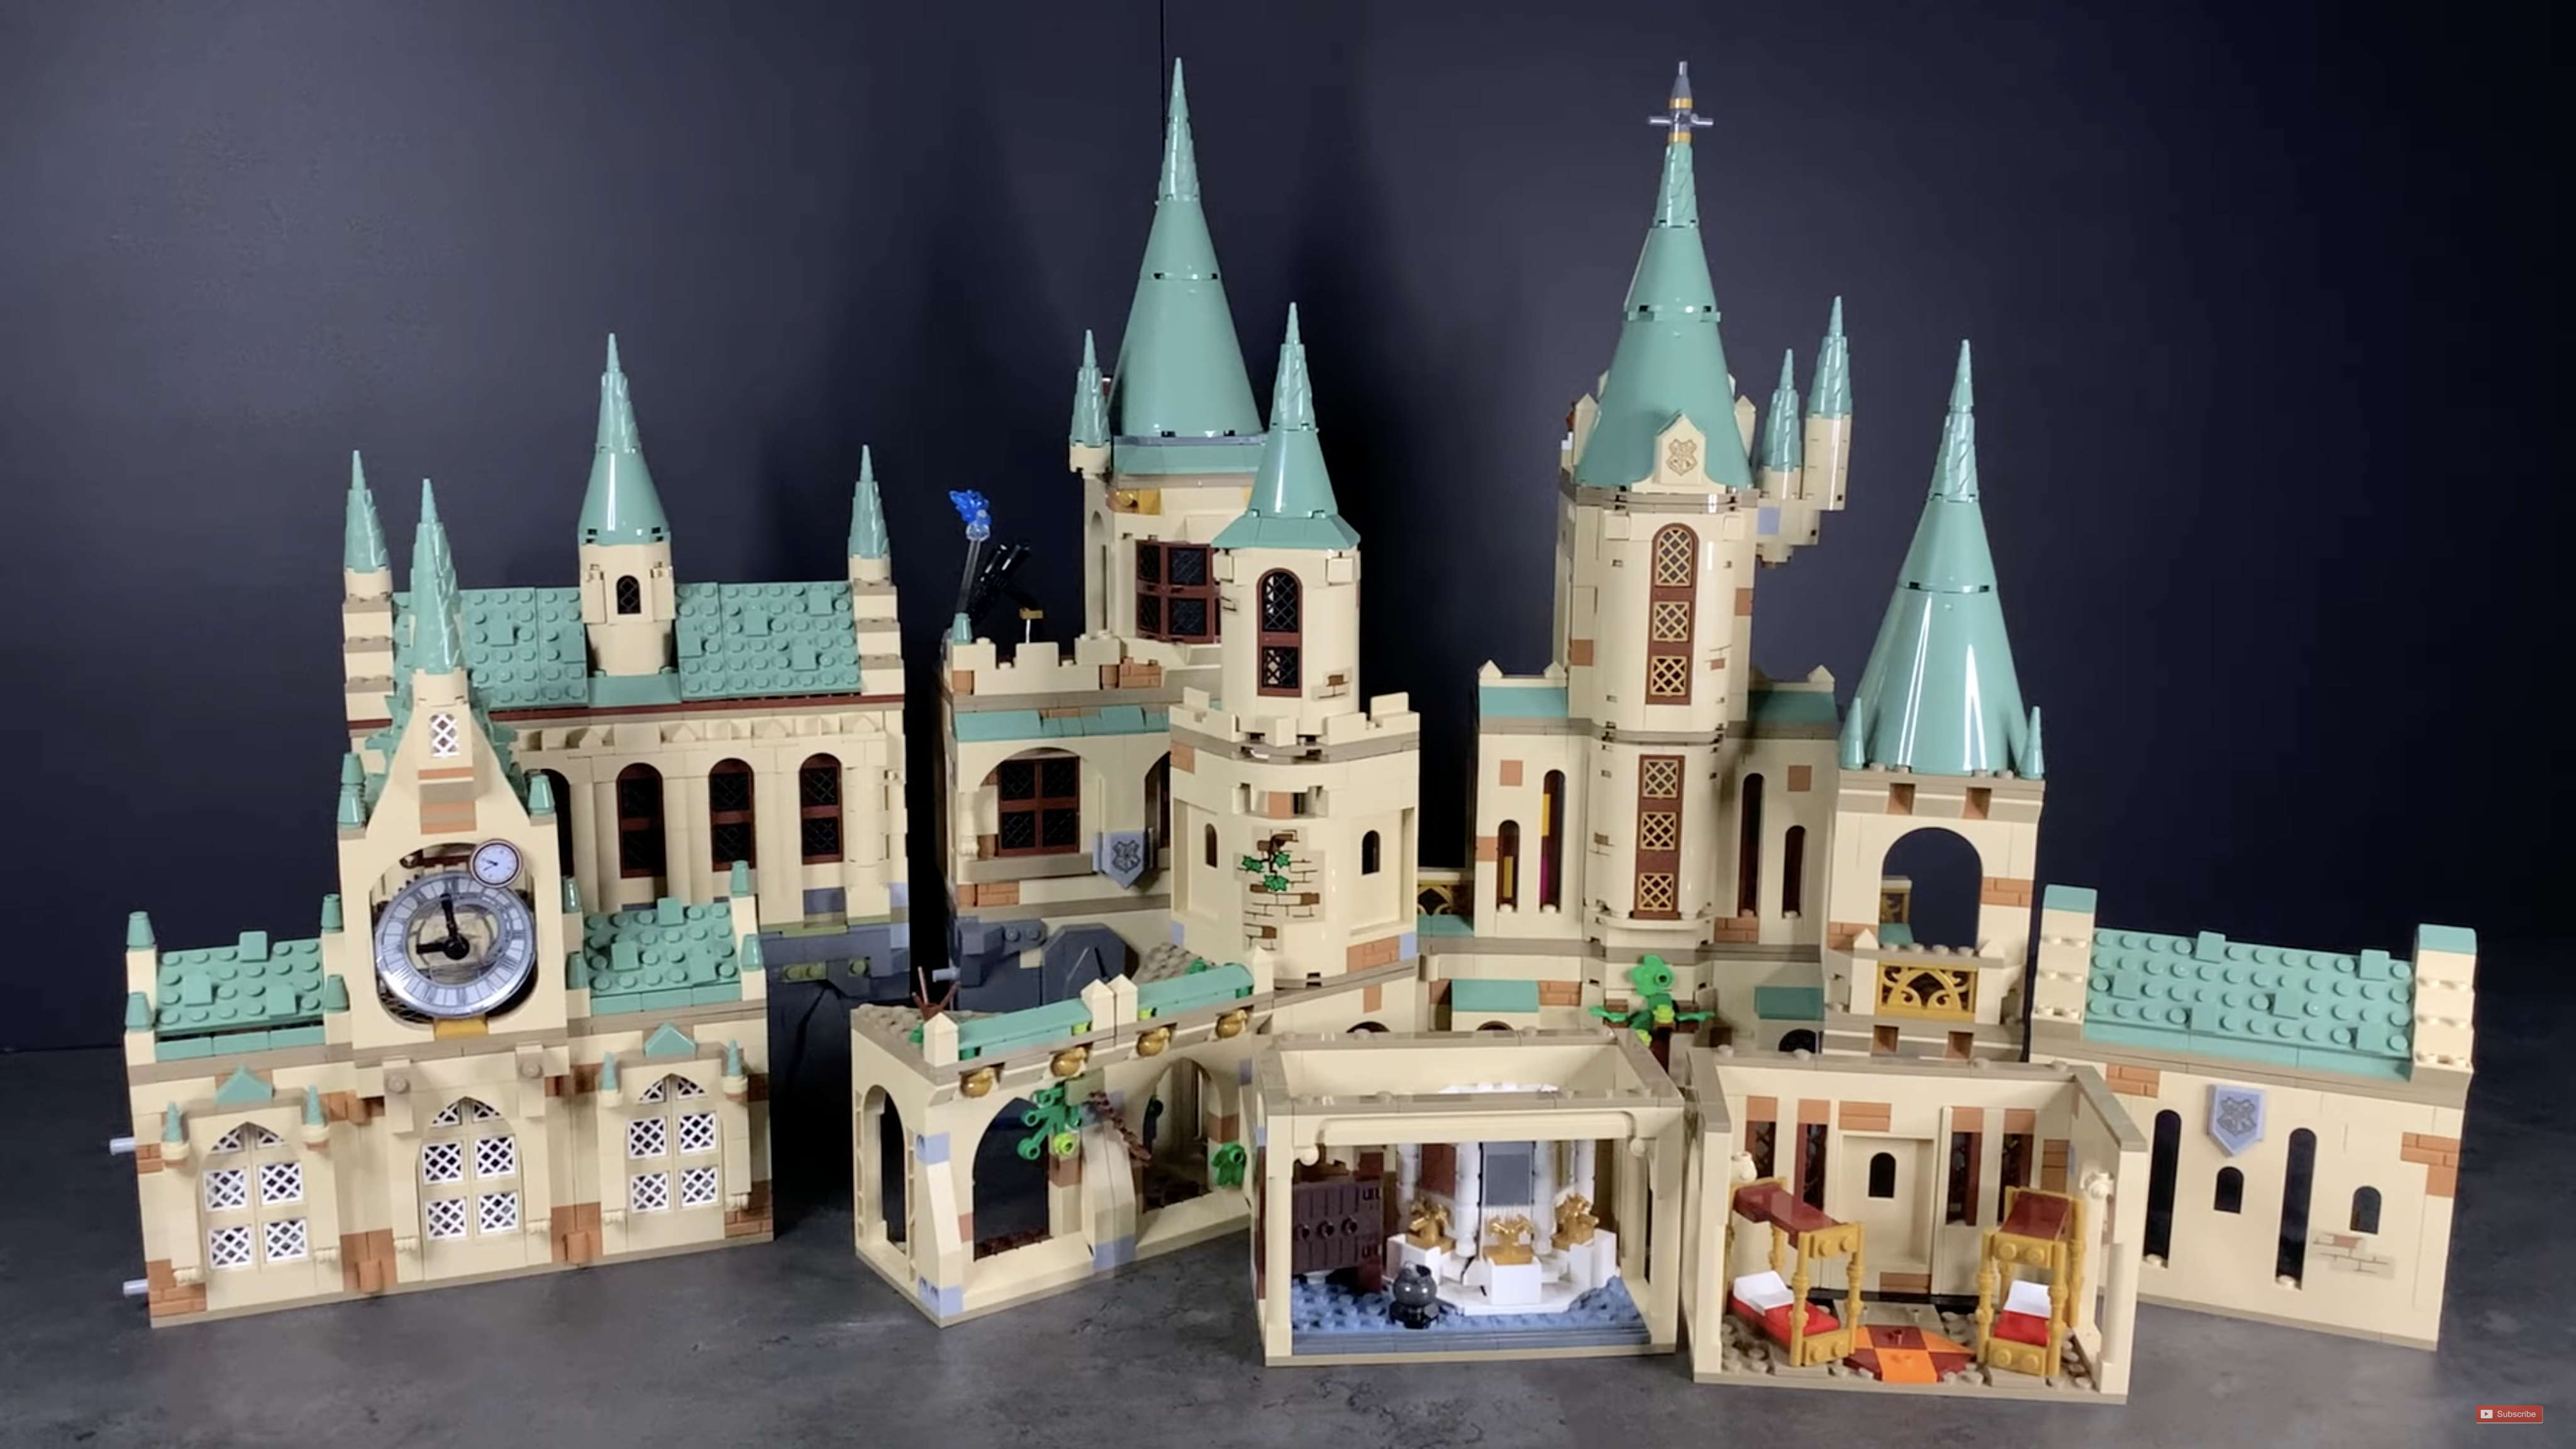 The Best LEGO Harry Potter Sets in 2022